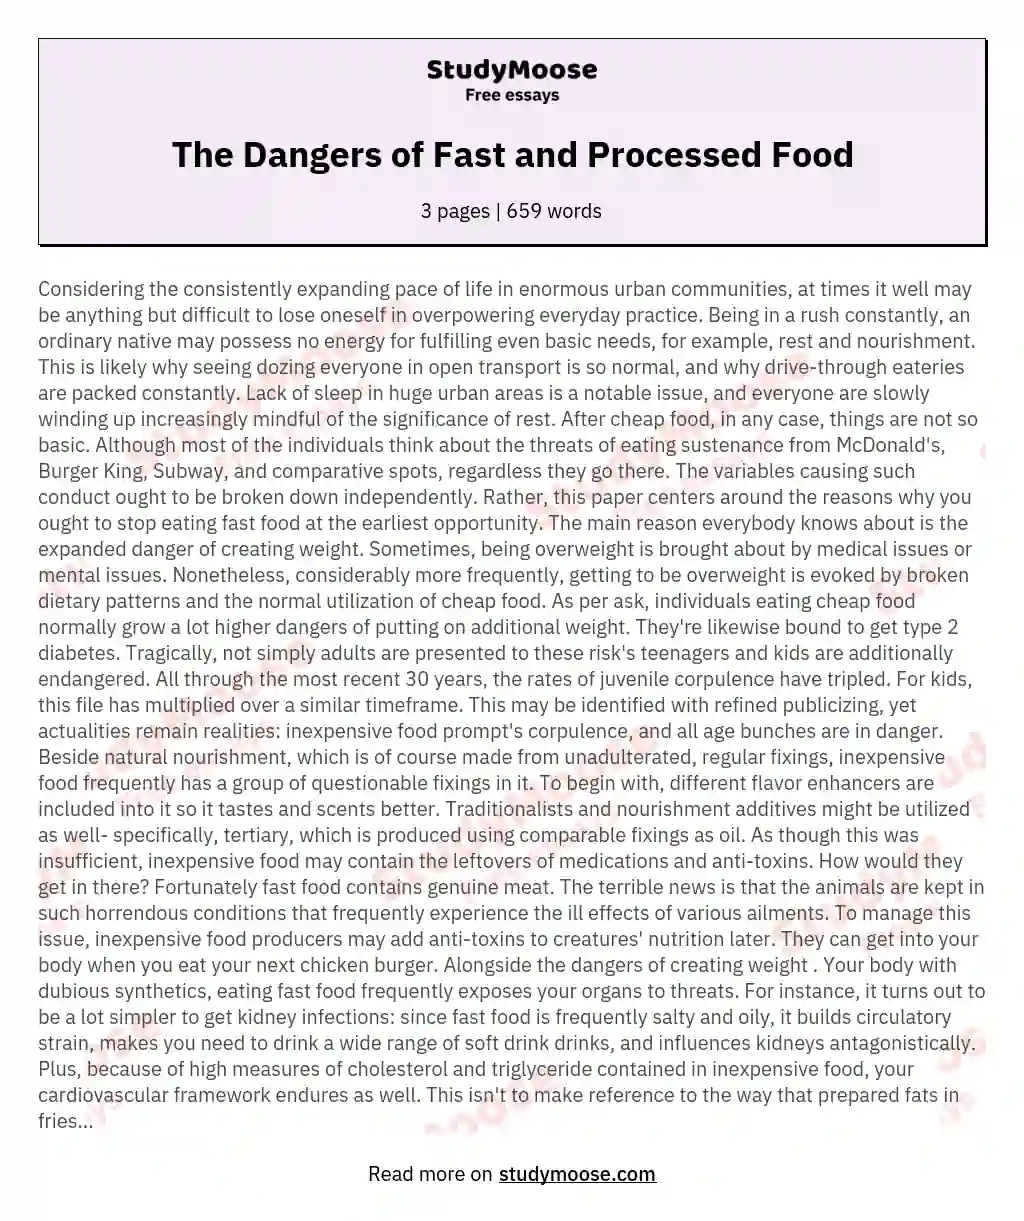 The Dangers of Fast and Processed Food essay